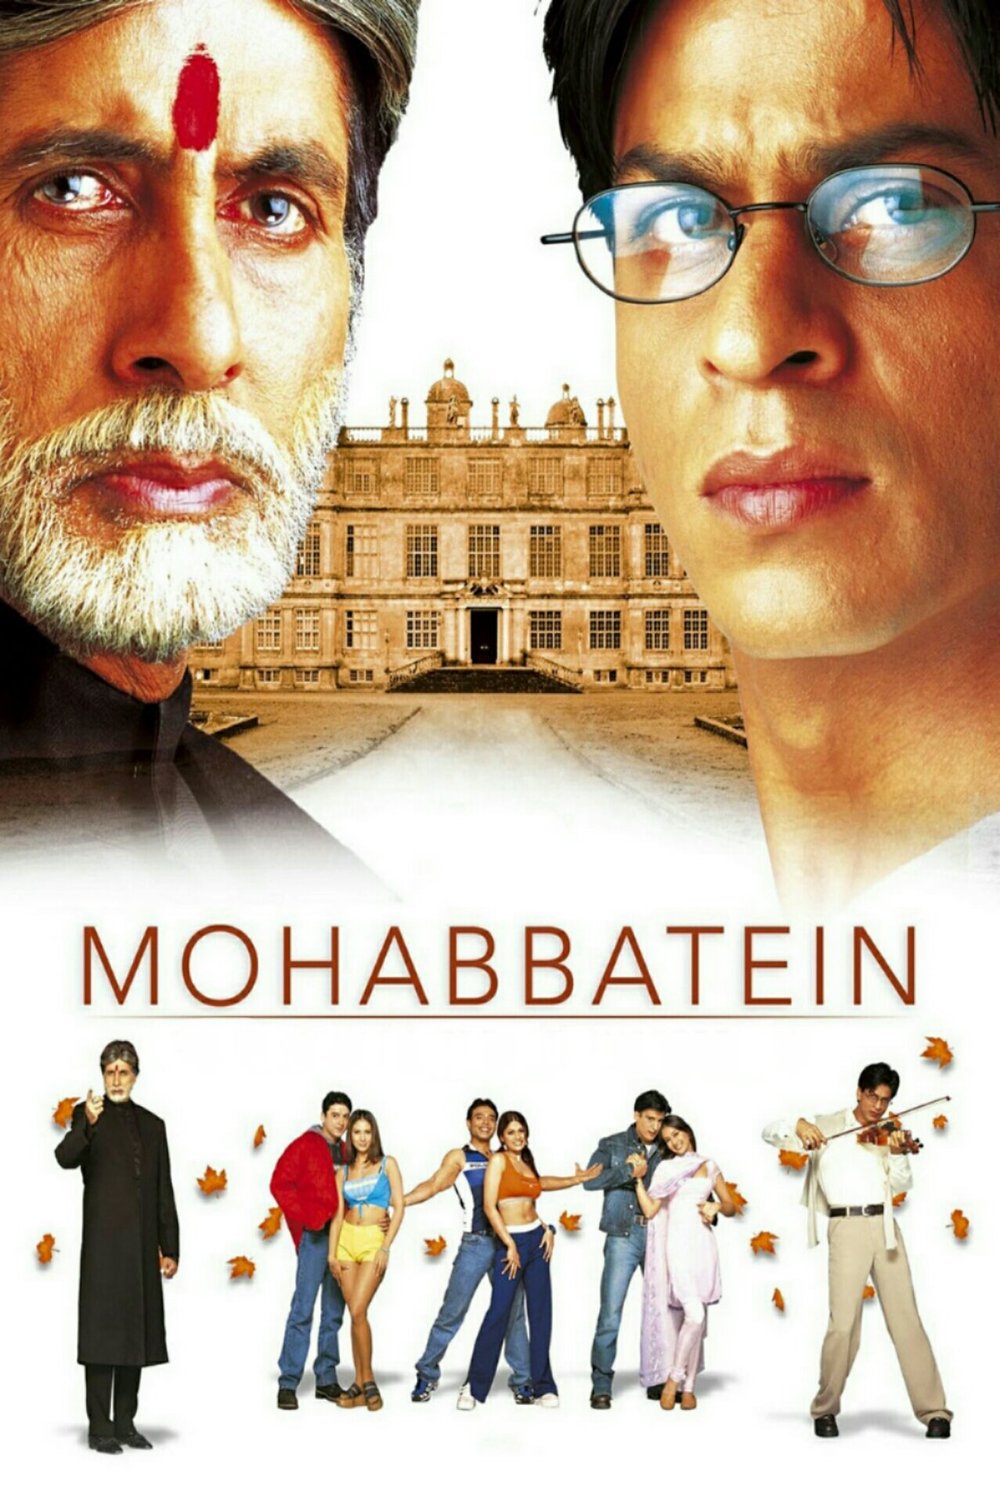 Poster of the movie Mohabbatein